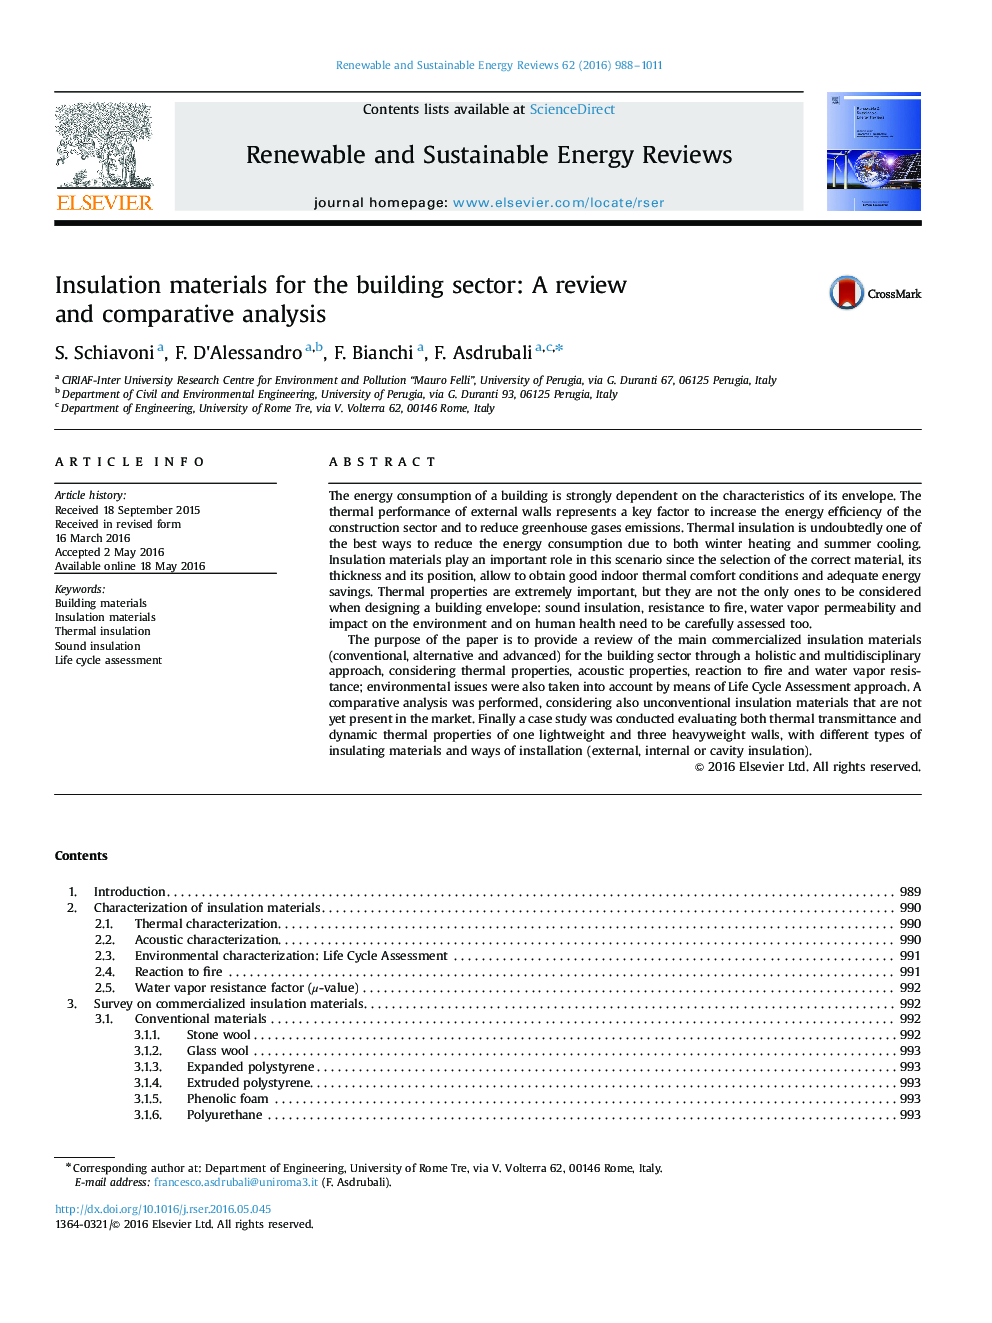 Insulation materials for the building sector: A review and comparative analysis